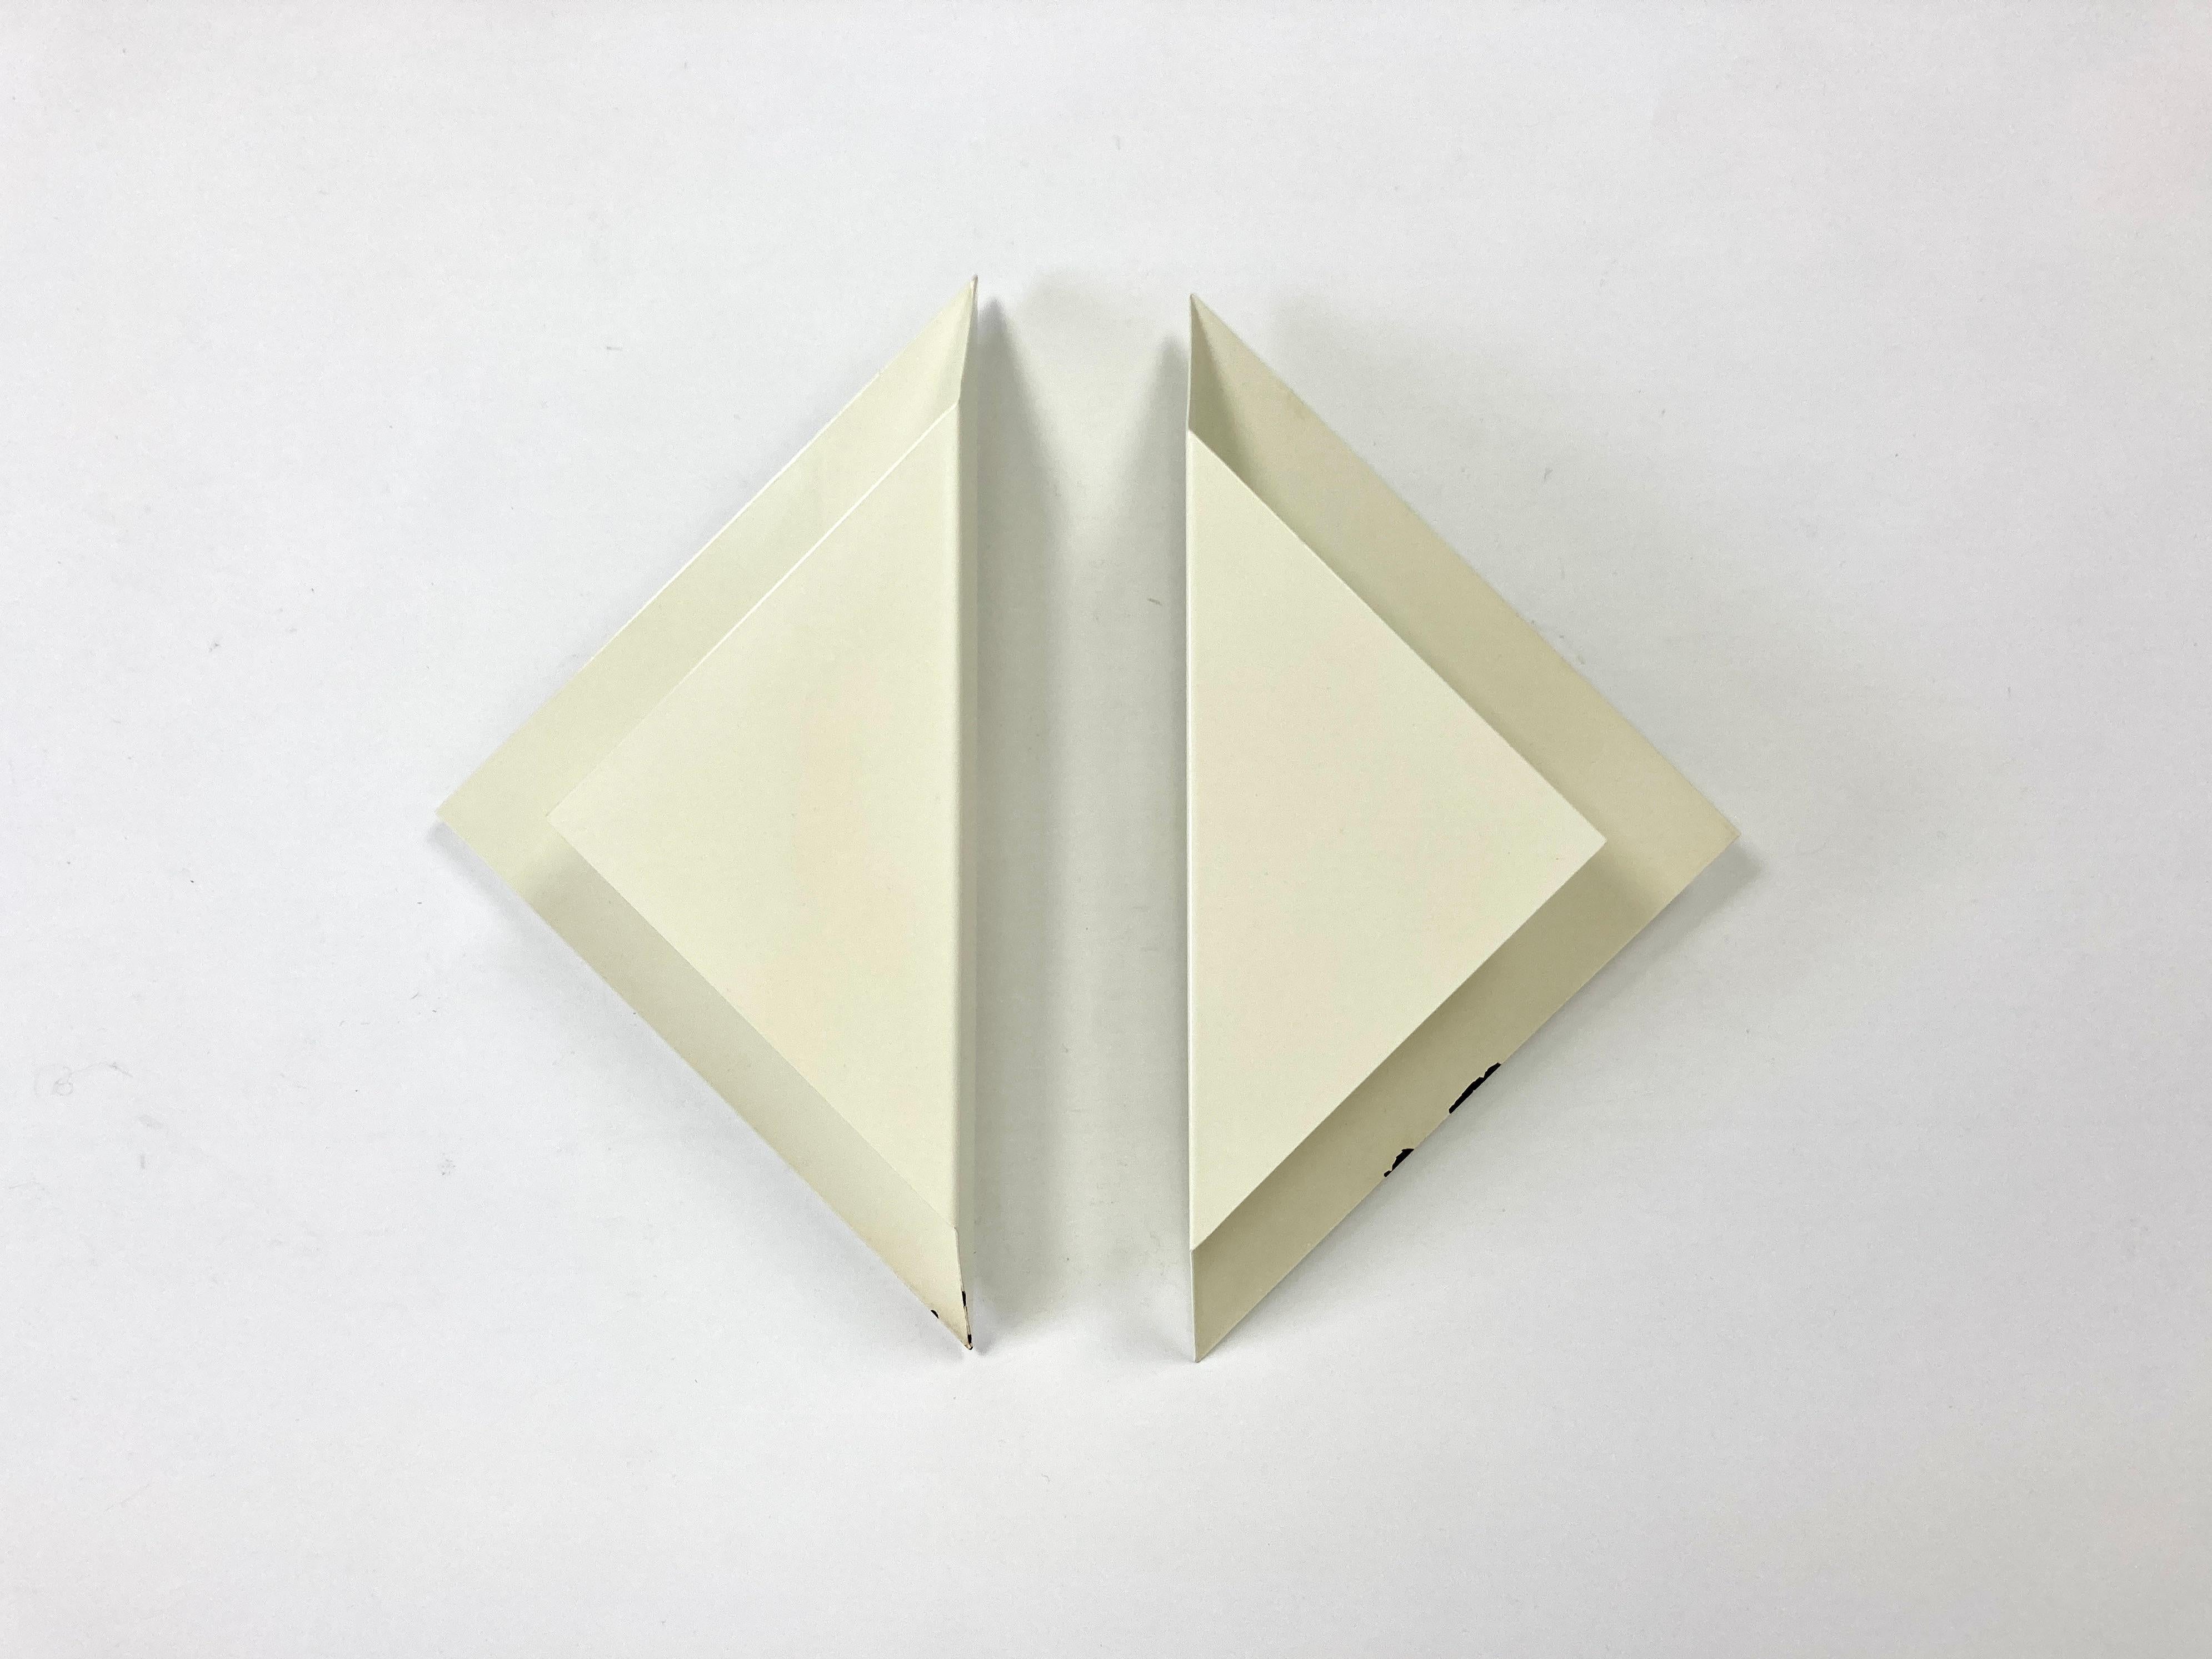 Pair of vintage mid century French wall lights, circa 1960-70.

Minimalist triangular design.

Original slightly off-white lacquered finish.

They can be wall mounted at any desired angle and sit slightly away from the wall.

Sourced from an